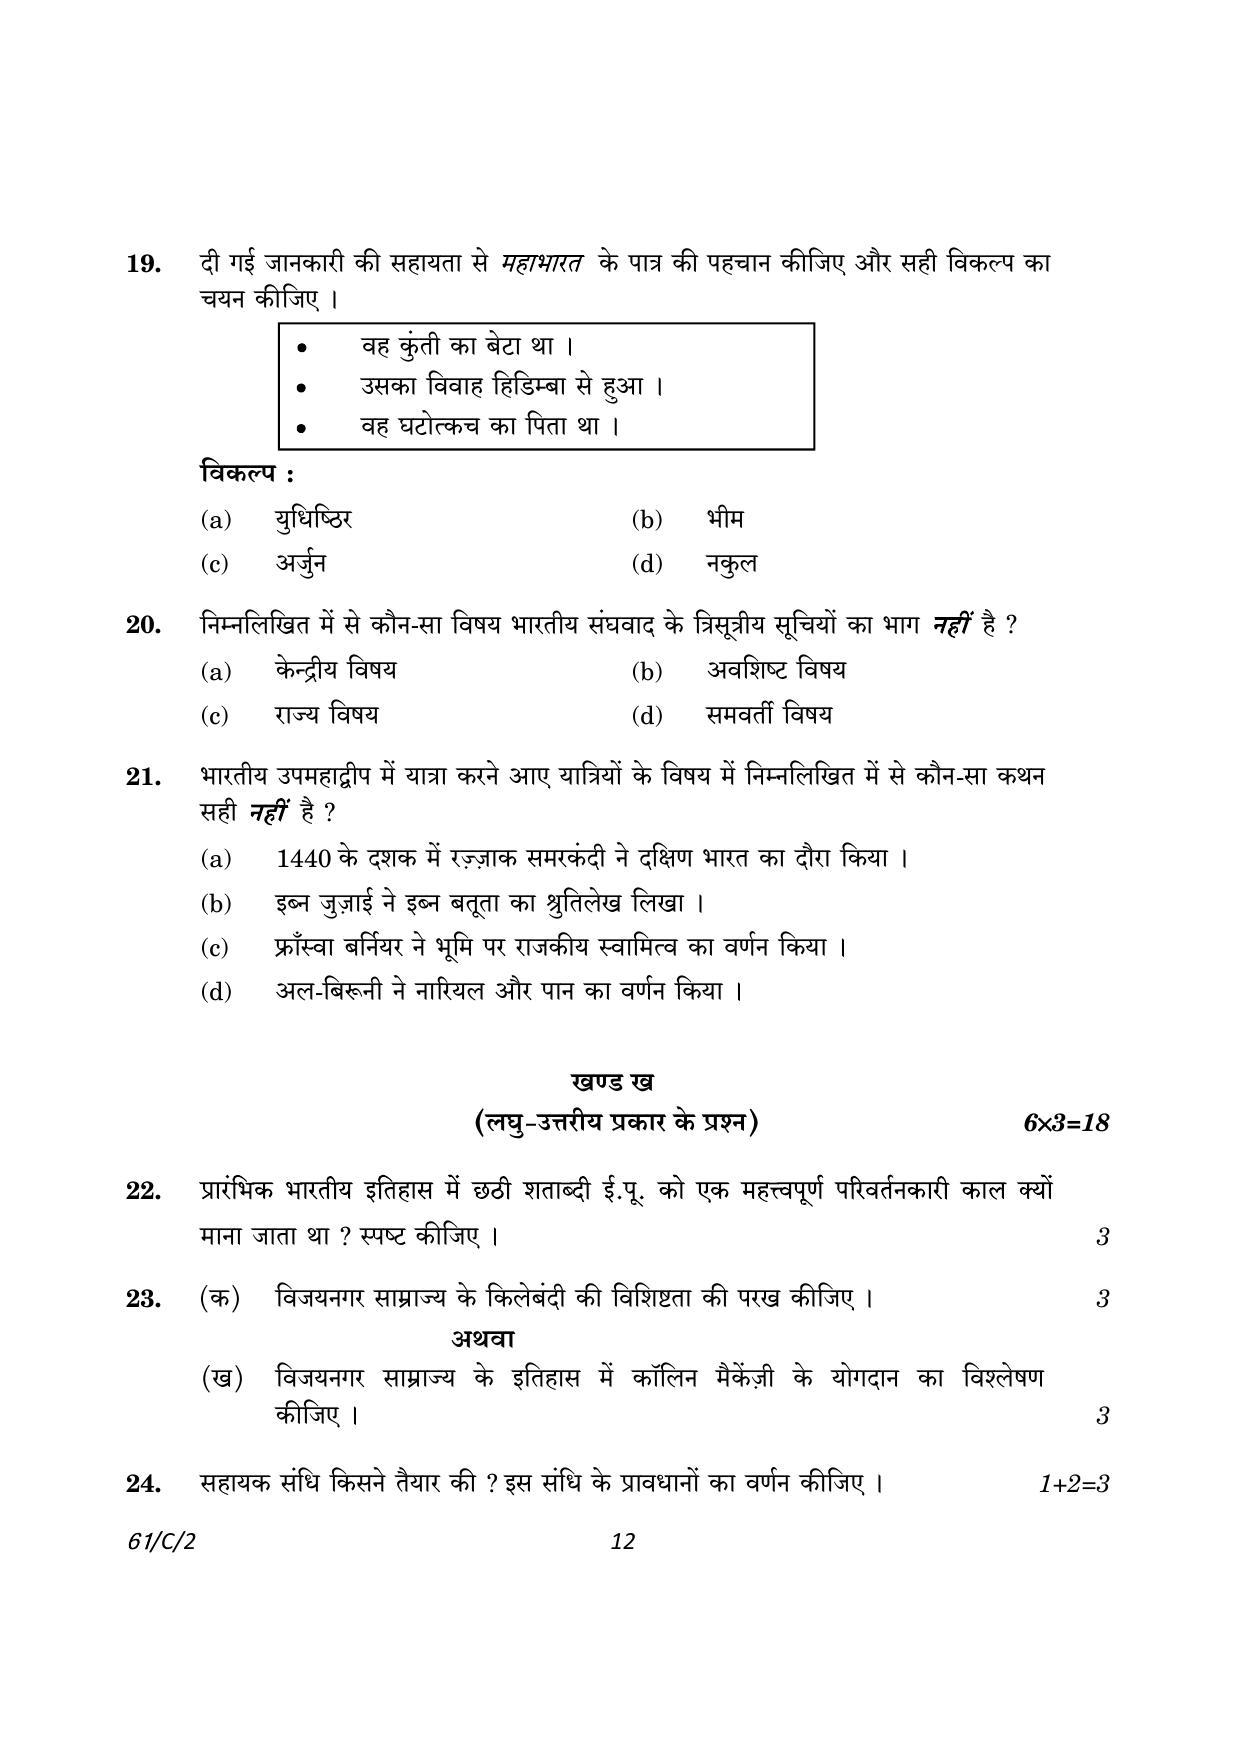 CBSE Class 12 61-2 History 2023 (Compartment) Question Paper - Page 12